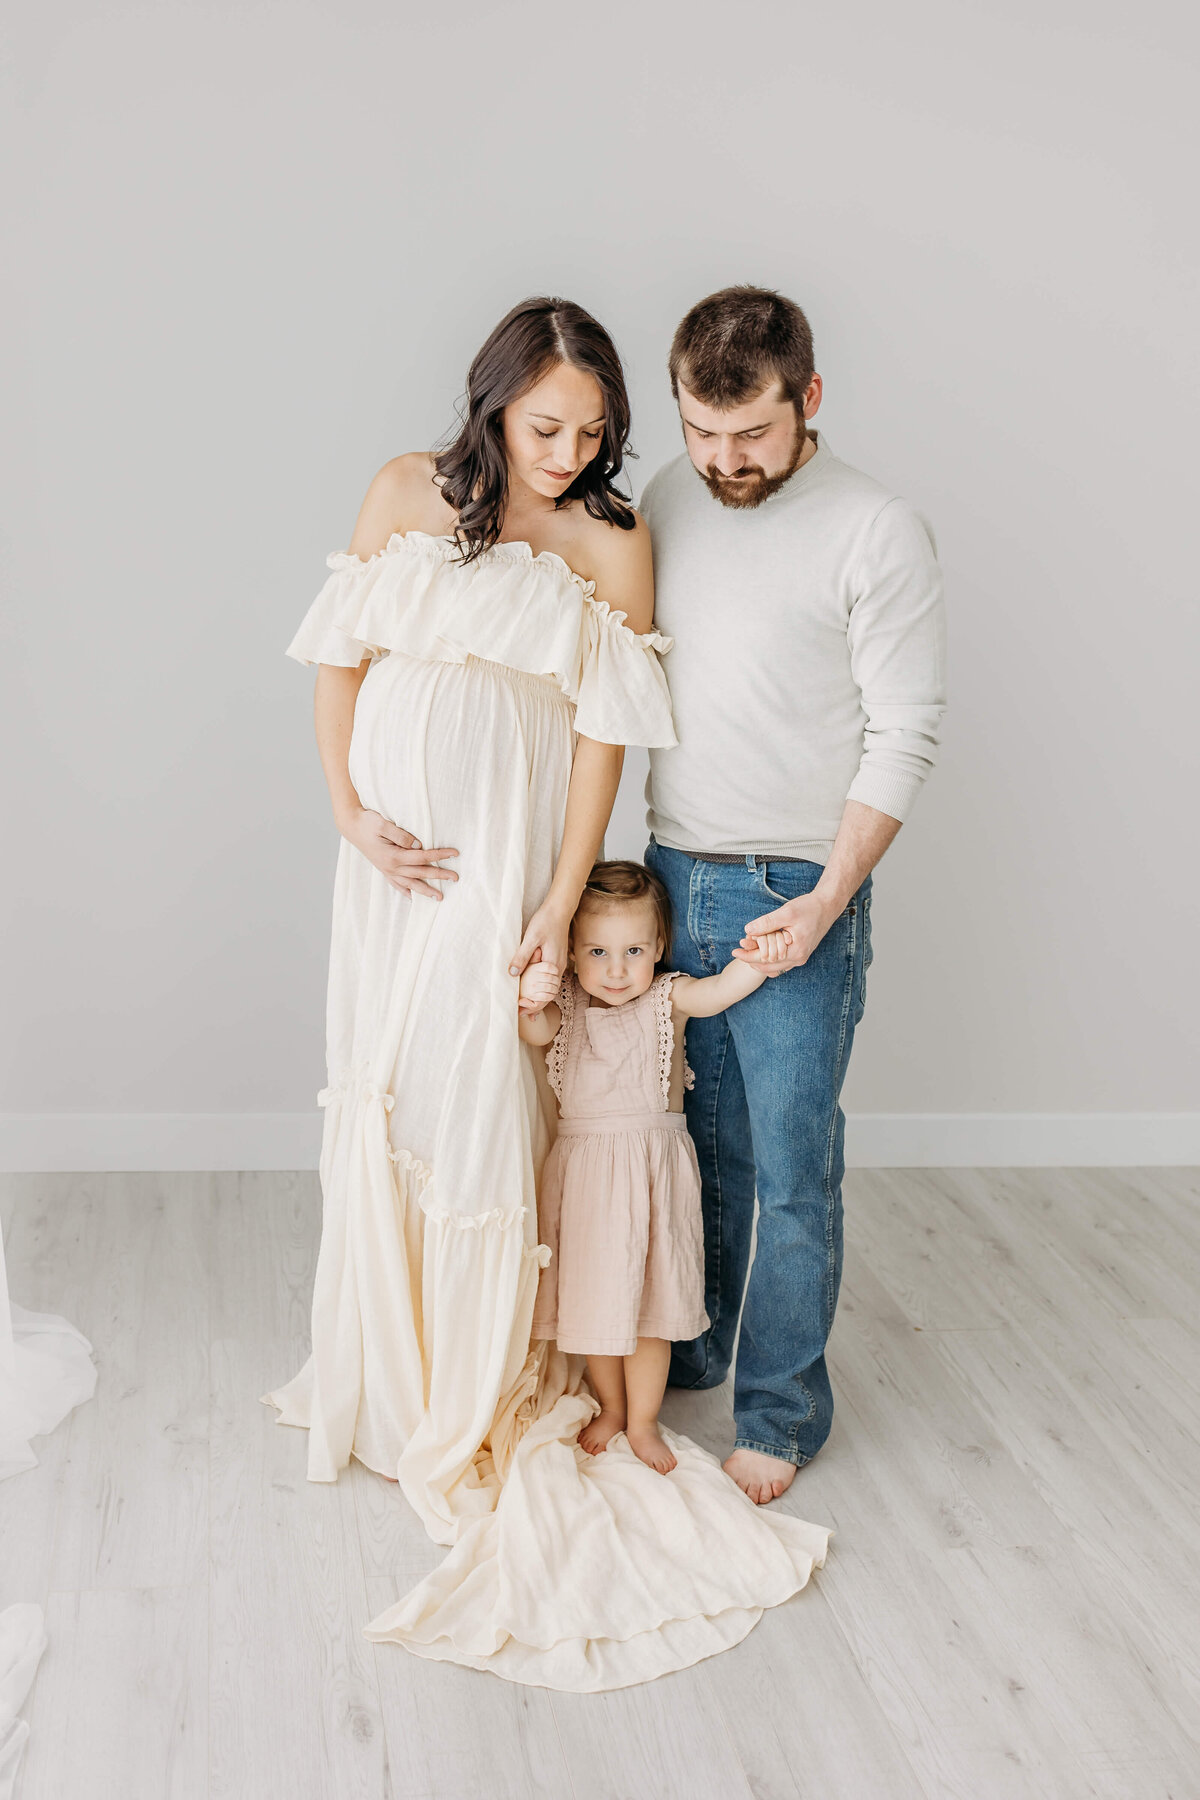 Yound family with little girl expecting another baby in white dress